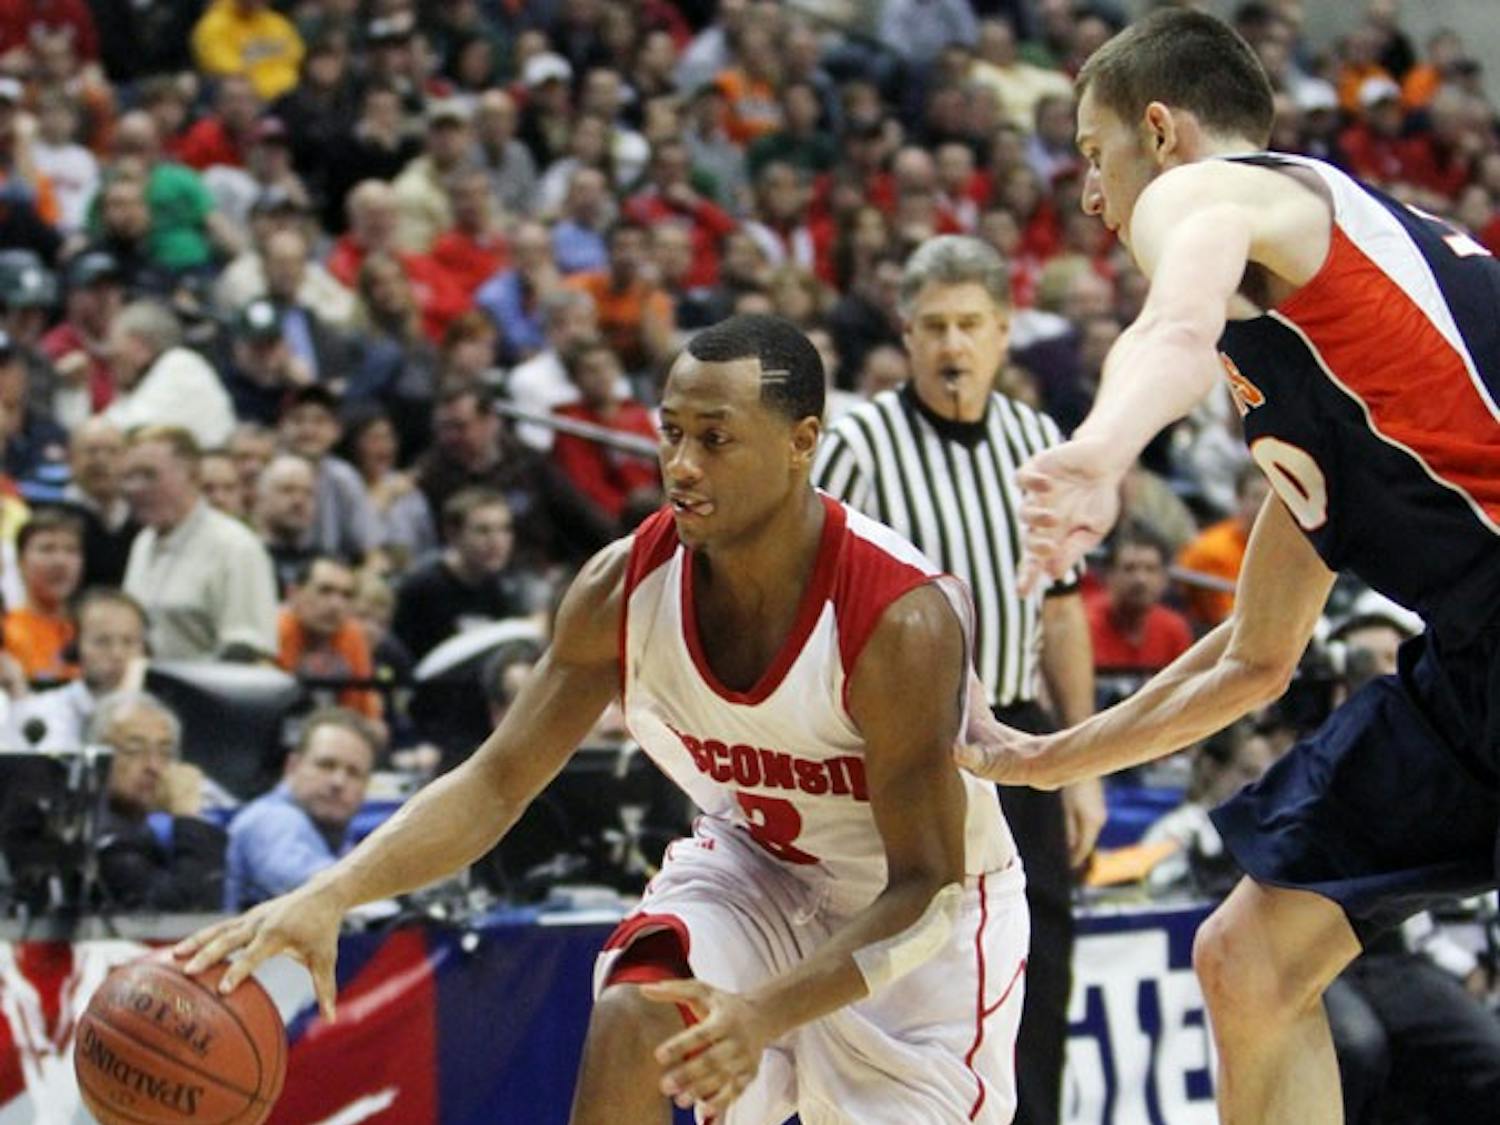 Badger seniors come up empty in Indianapolis